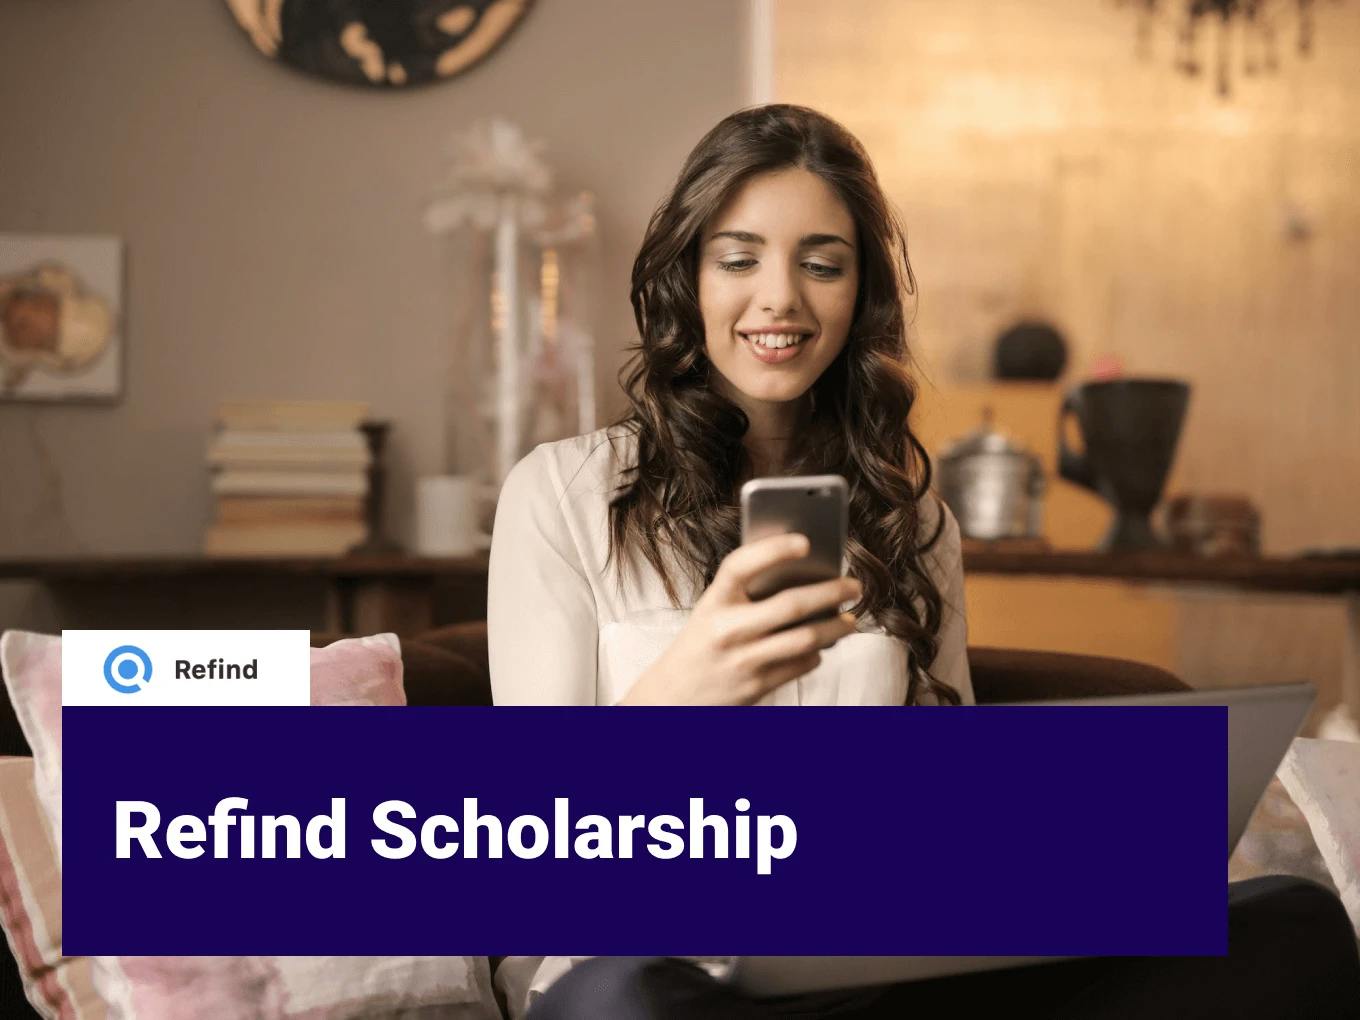 “Refind — Get Smarter Every Day” Scholarship